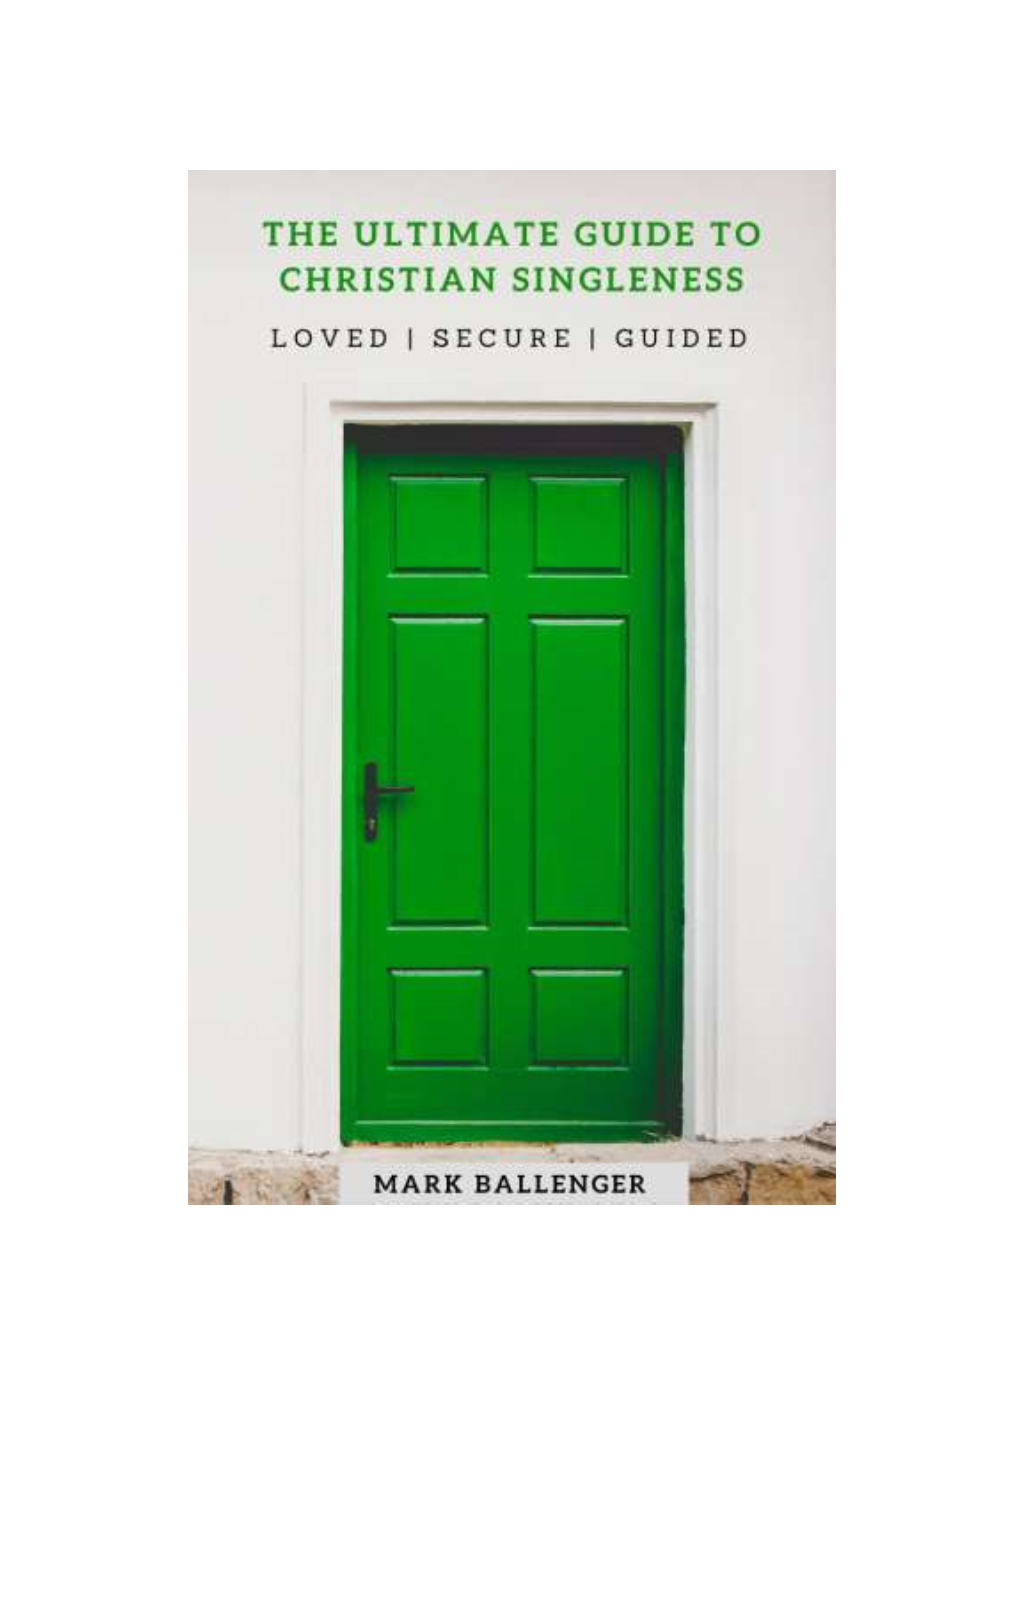 The Ultimate Guide to Christian Singleness, by Mark Ballenger